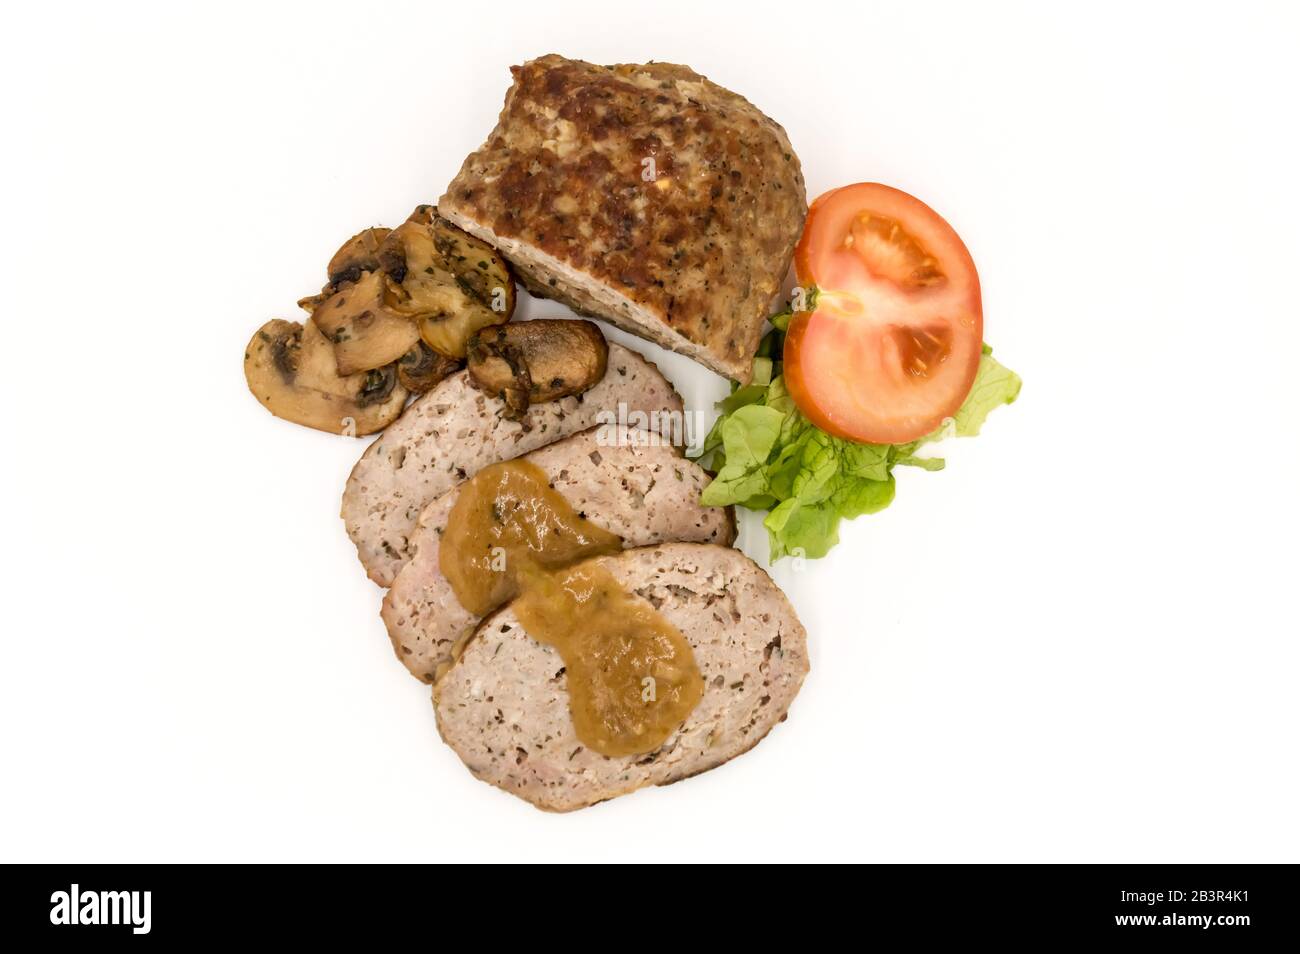 Meatloaf cut into slices with mushrooms, tomato and salad top view on an isolated white background. Stock Photo